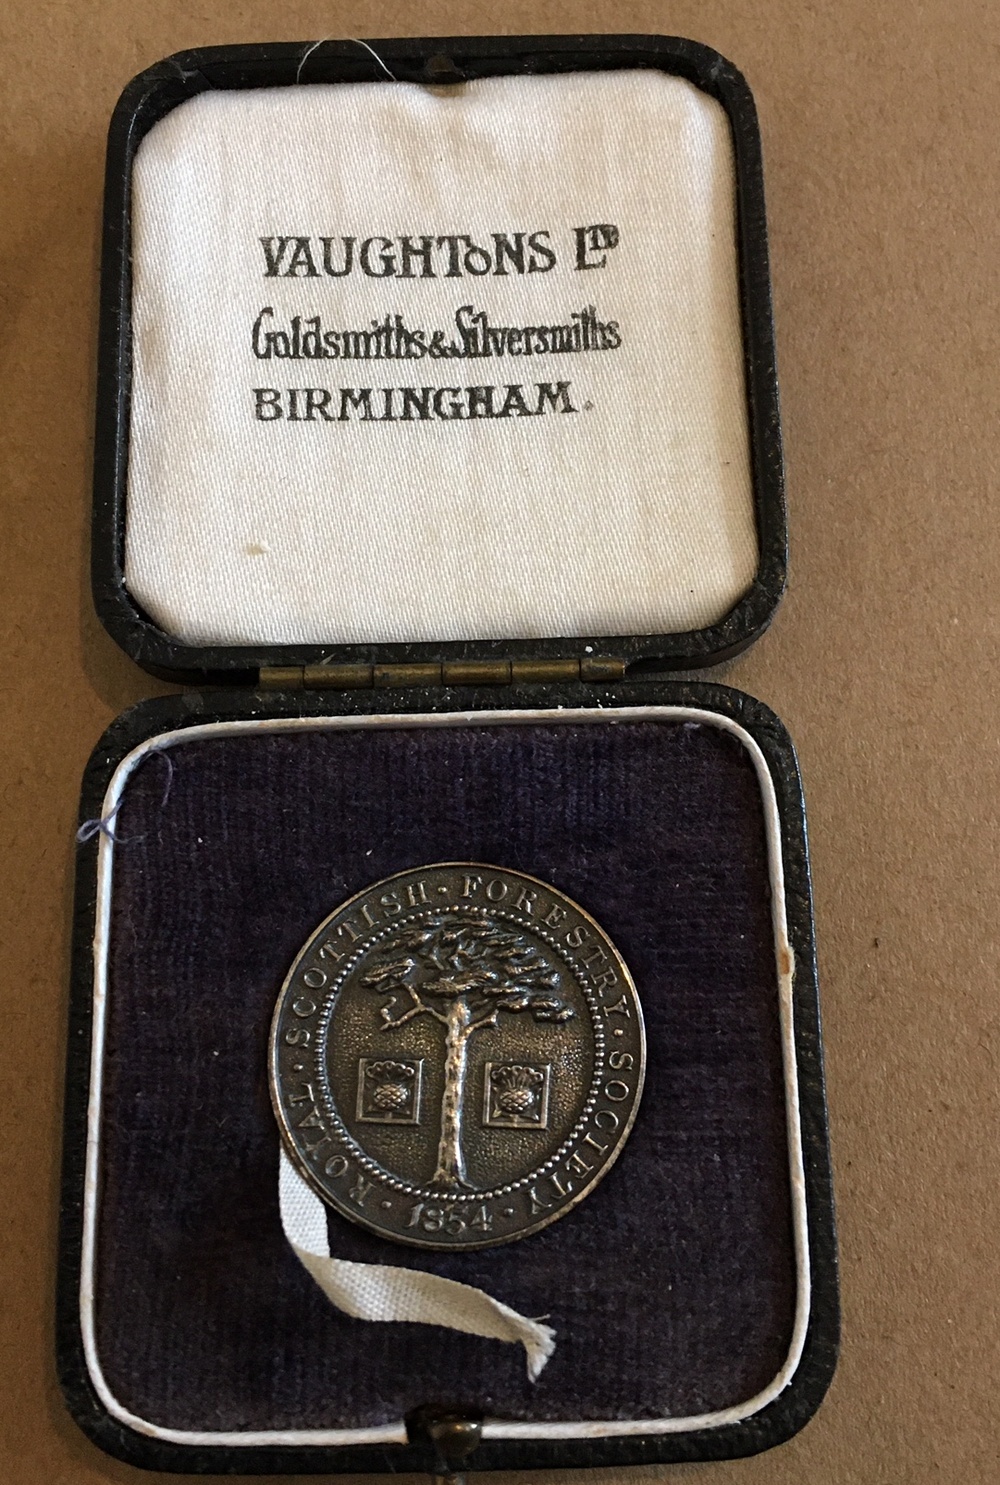 Vintage Boxed Silver "Be Aye Sticking in a Tree" Medal dated 1935.